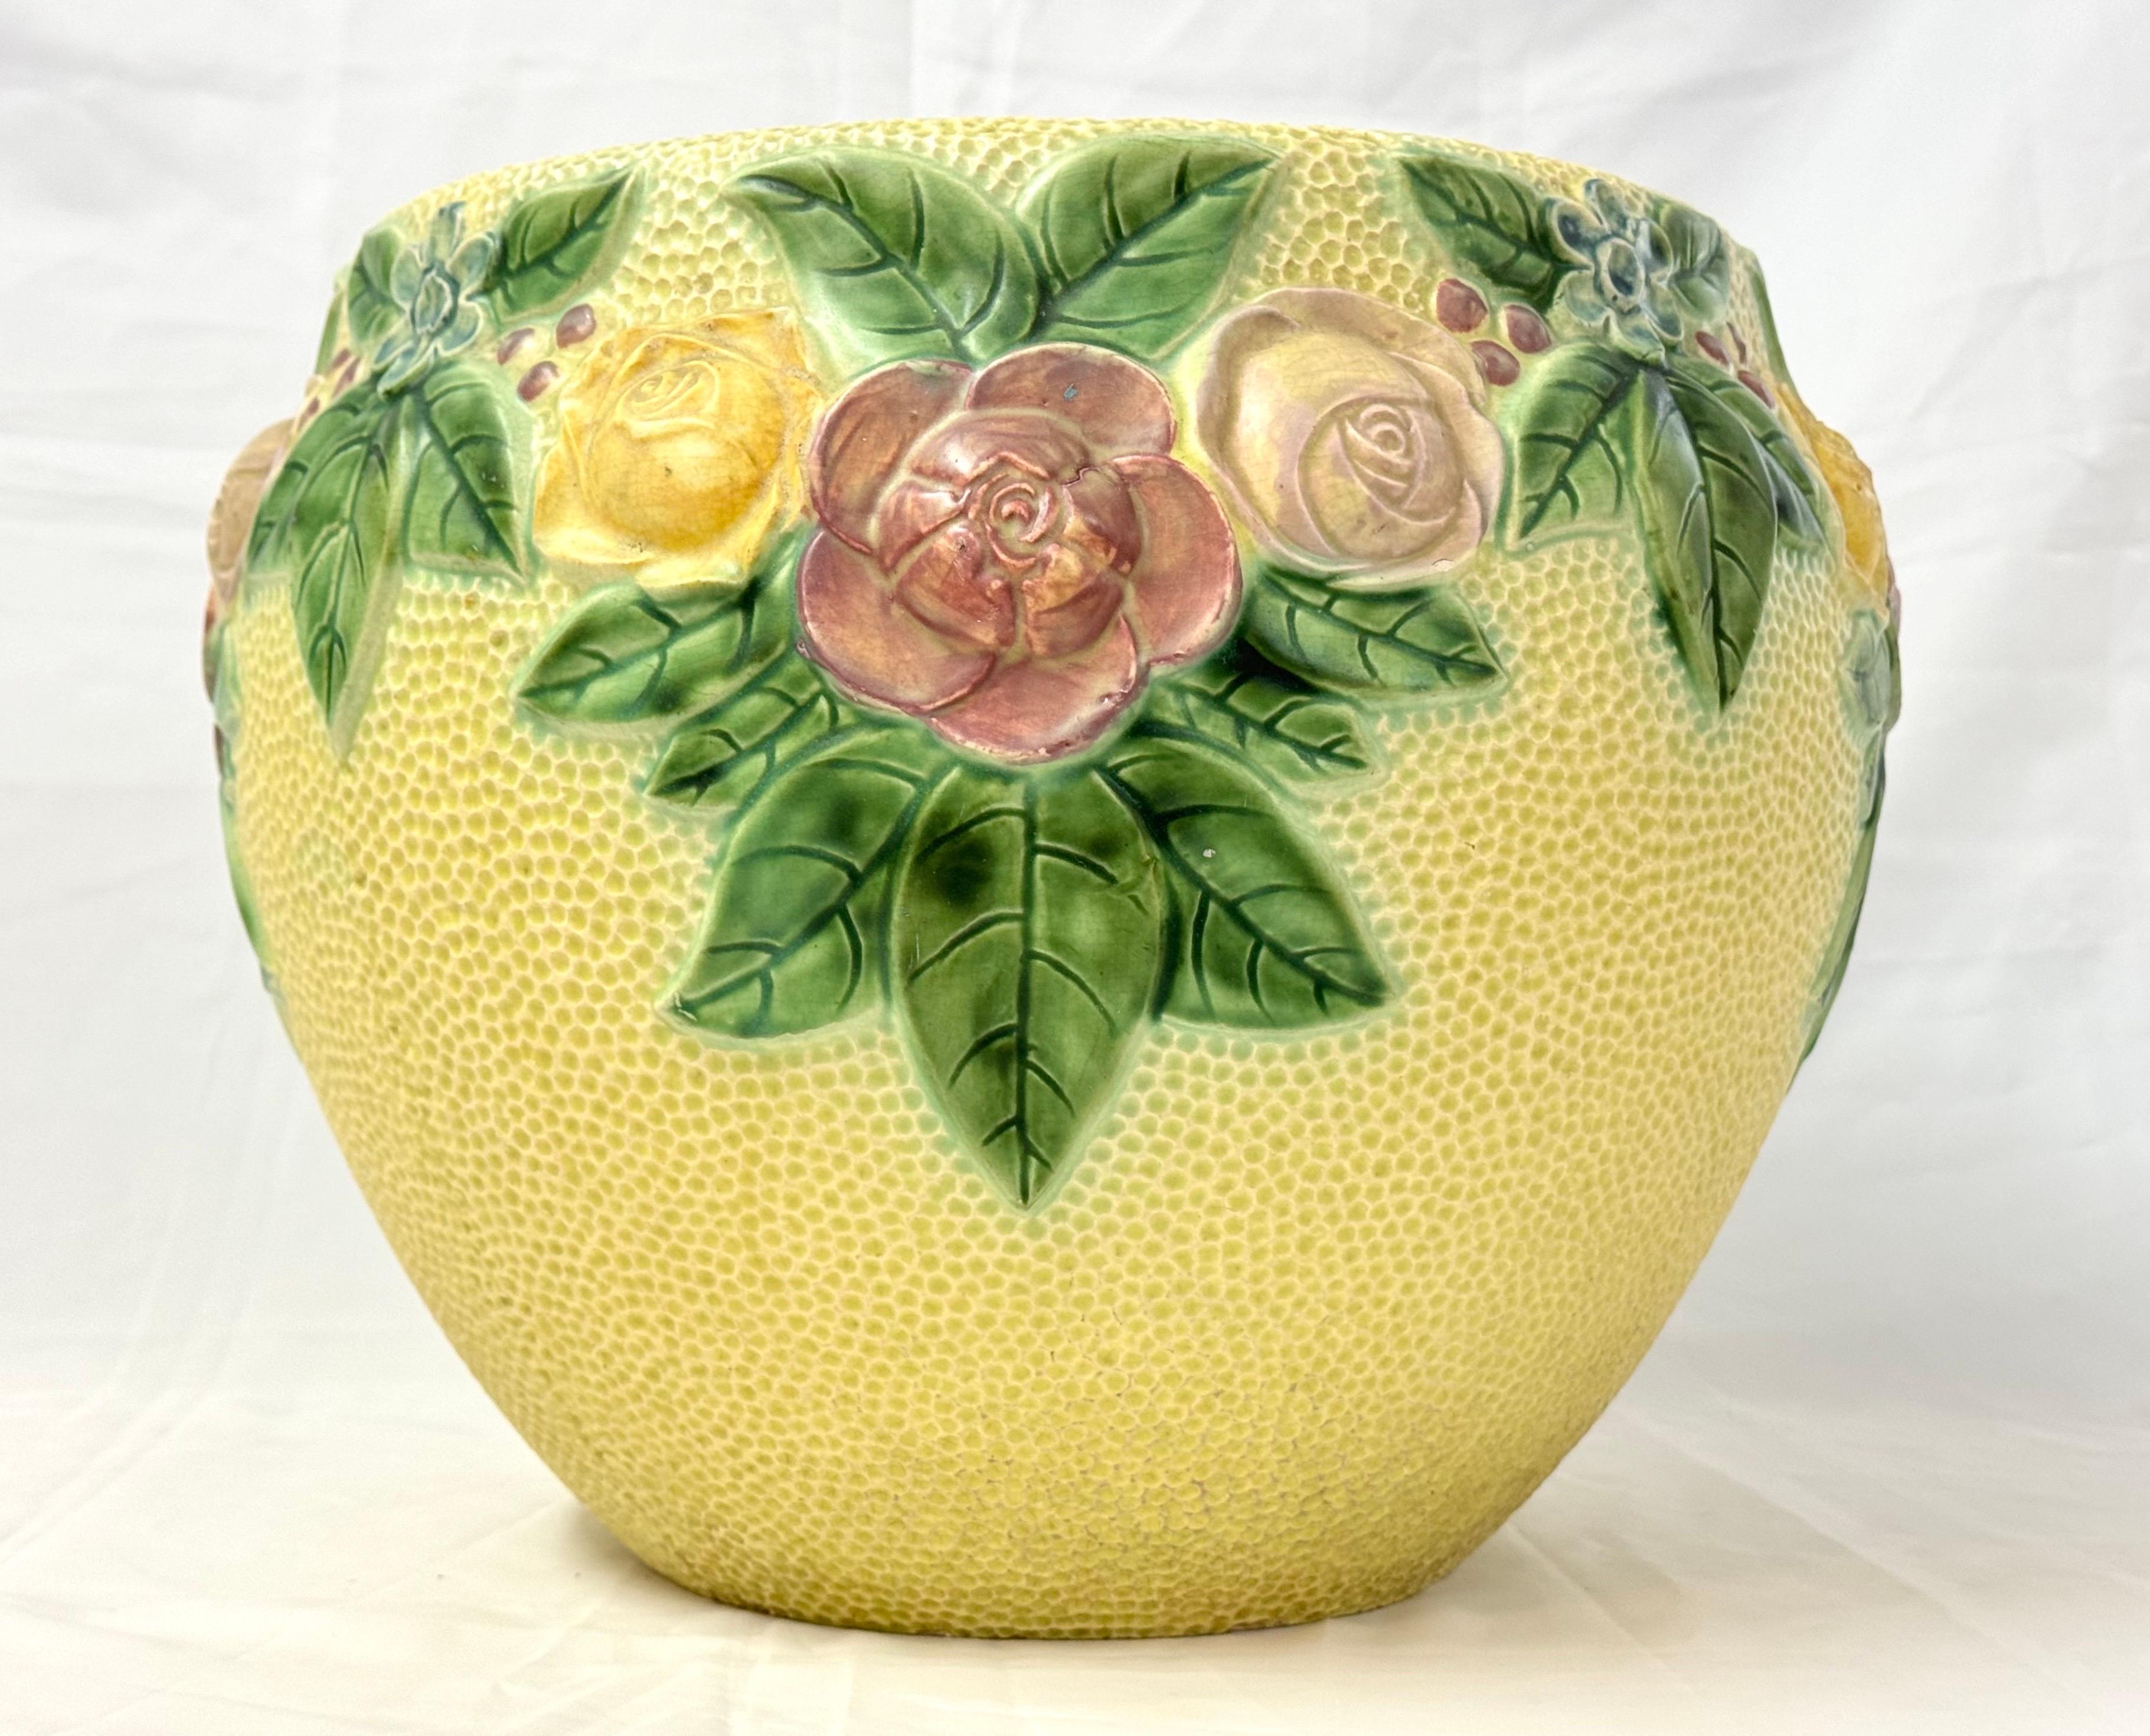 Large Roseville Rozane Floral Ceramic Jardiniere. Gorgeous Yellow and Green tones make up this romantic jardiniere. Large size to hold a gorgeous large plant.  
In 1900 Young hired Ross C. Purdy to create the company's first art pottery line, named